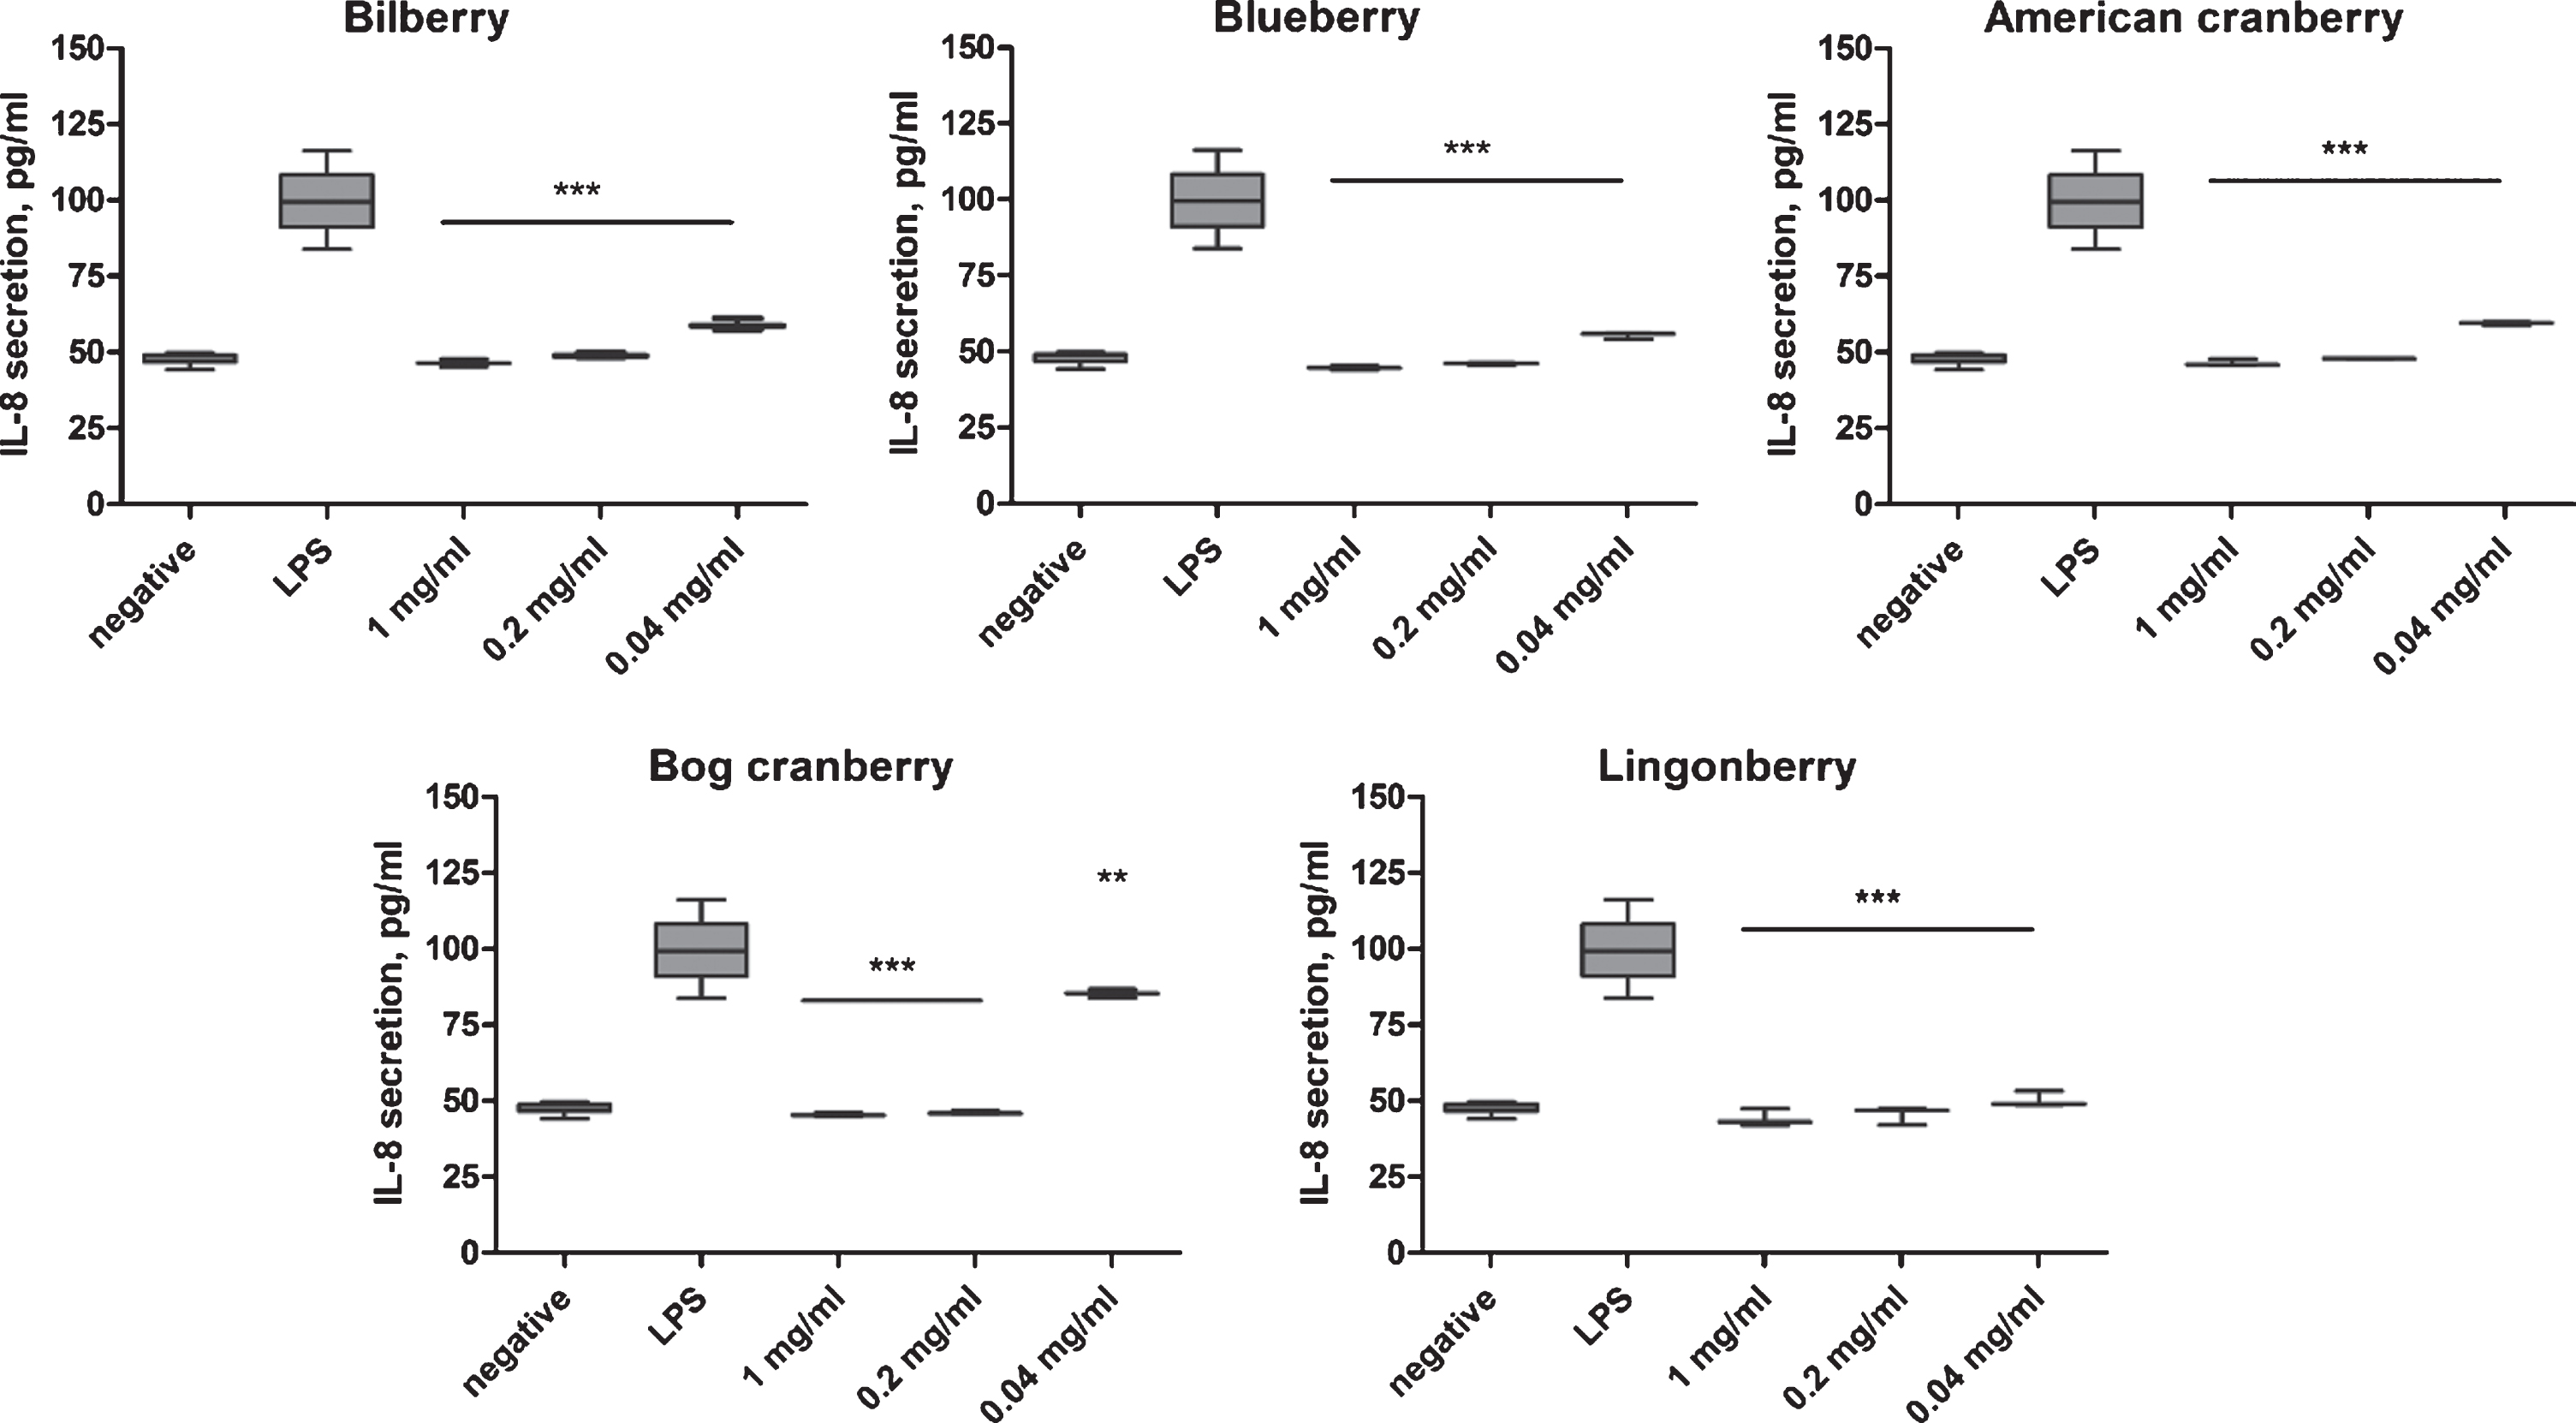 Effect of Vaccinium spp. berry pomace extracts on IL-8 secretion in LPS-stimulated THP-1 monocytes. Negative indicates the IL-8 level in unstimulated THP-1 cells. LPS indicates the IL-8 level in LPS-stimulated THP-1 cells. The statistical significance of the effect of the extract is denoted as *P < 0.05, **P < 0.01, and ***P < 0.001 compared with the response of LPS-stimulated THP-1 cells.